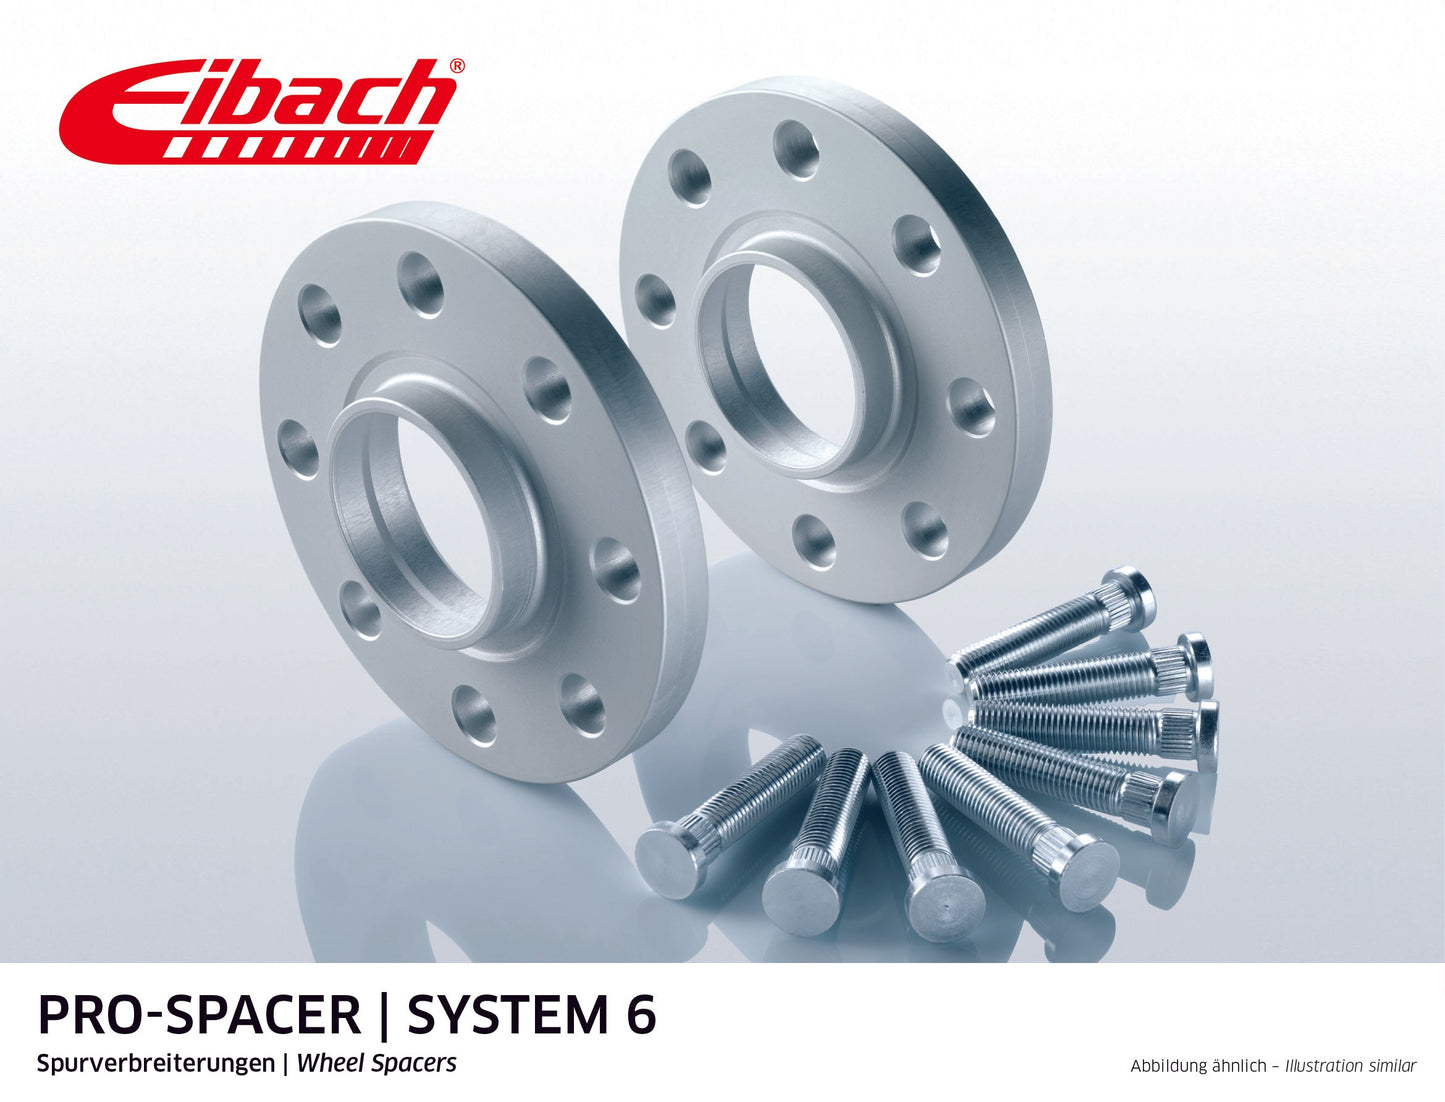 Eibach Pro-Spacer Kit (Pair Of Spacers) 15mm Per Spacer (System 6) S90-6-15-033 (Silver) at £131.68